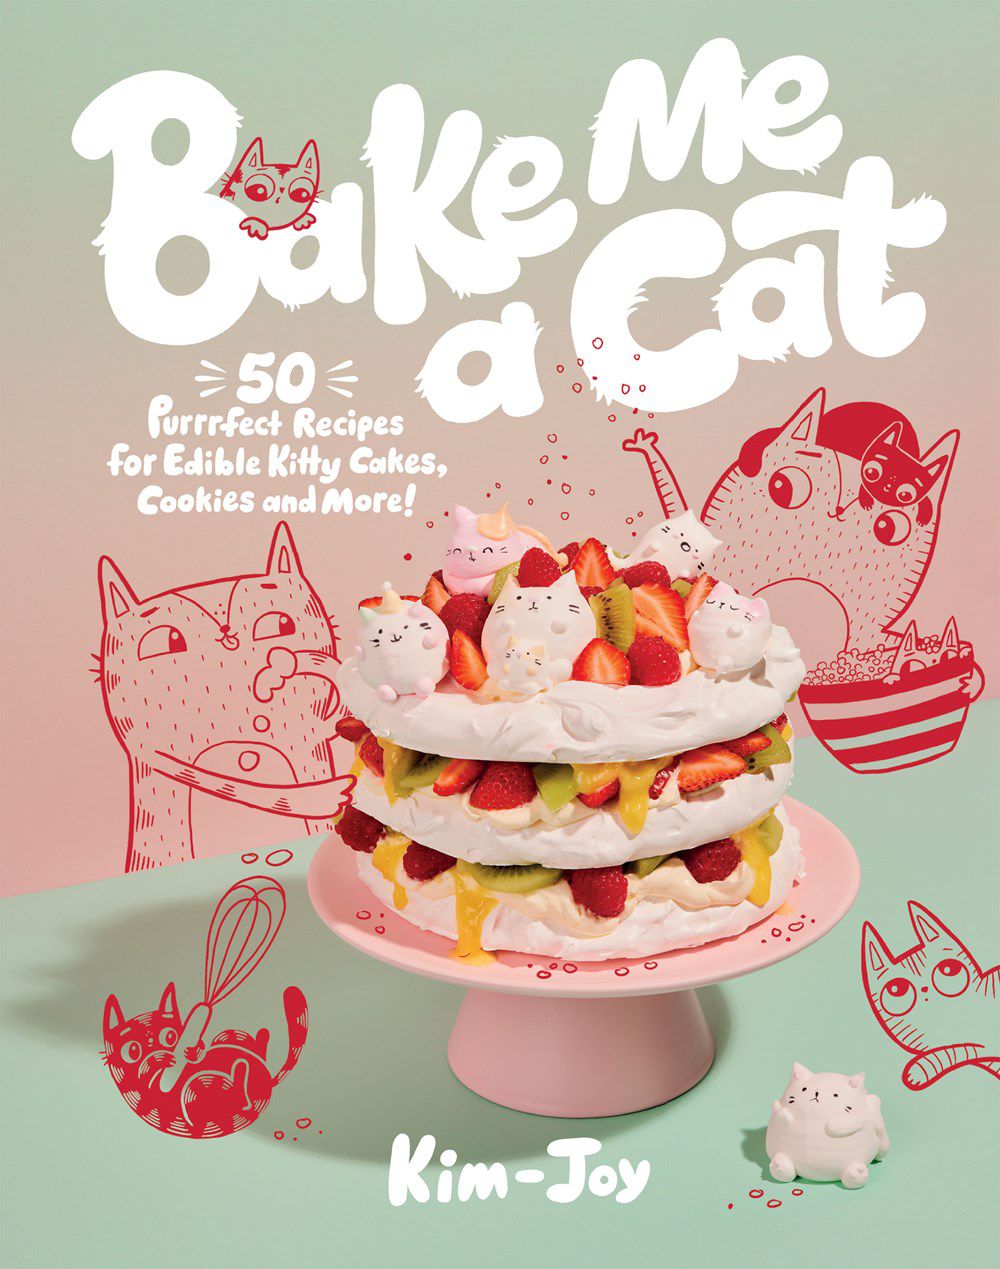 Bake Me a Cat cover